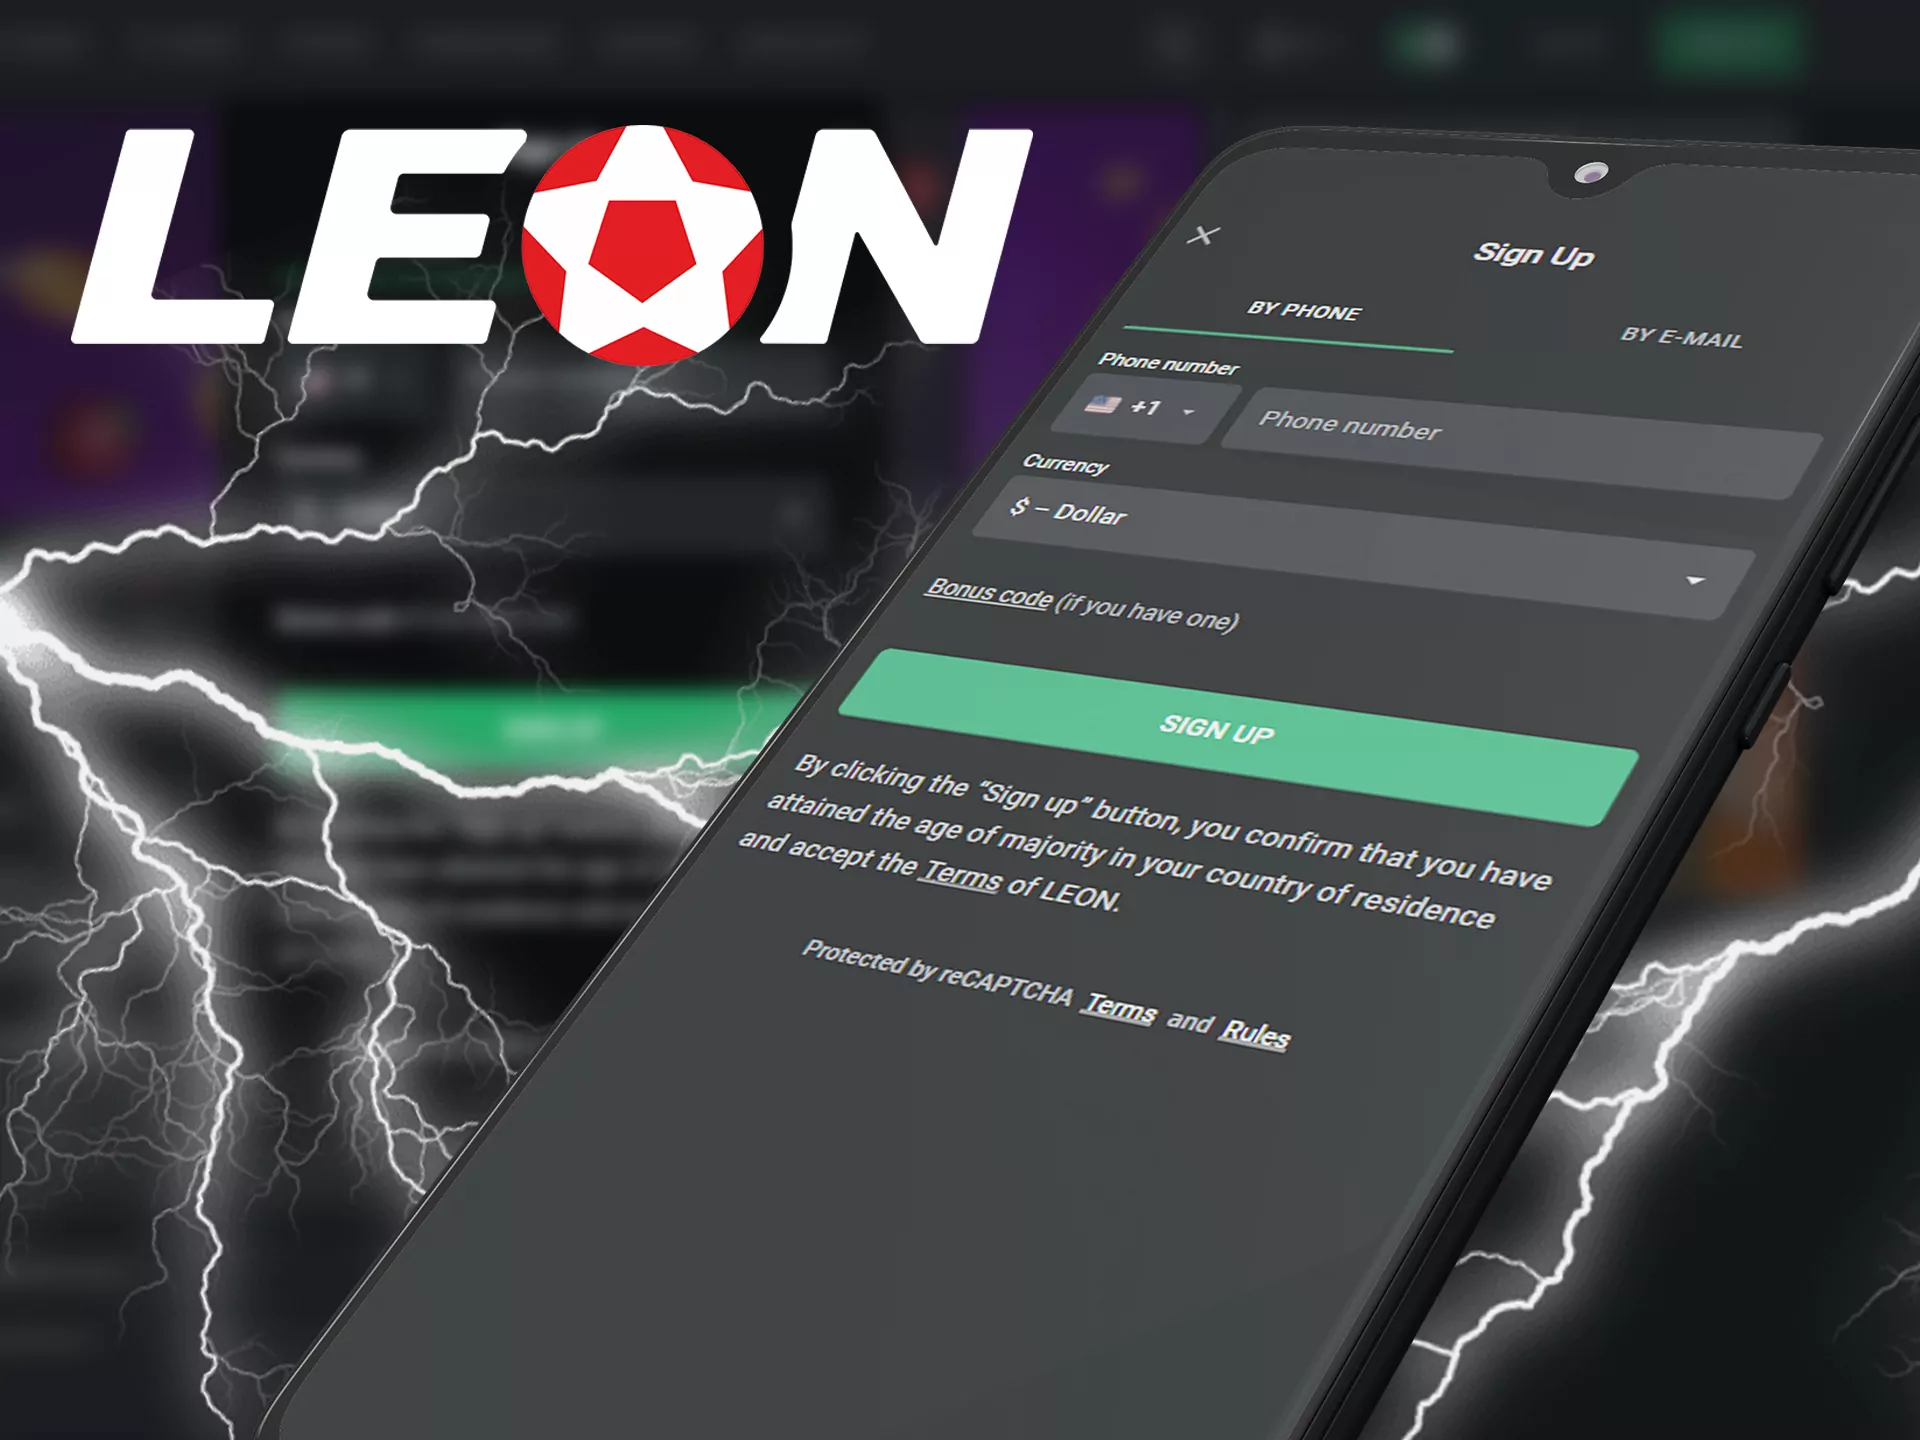 You can create the Leon bet account right in the app.